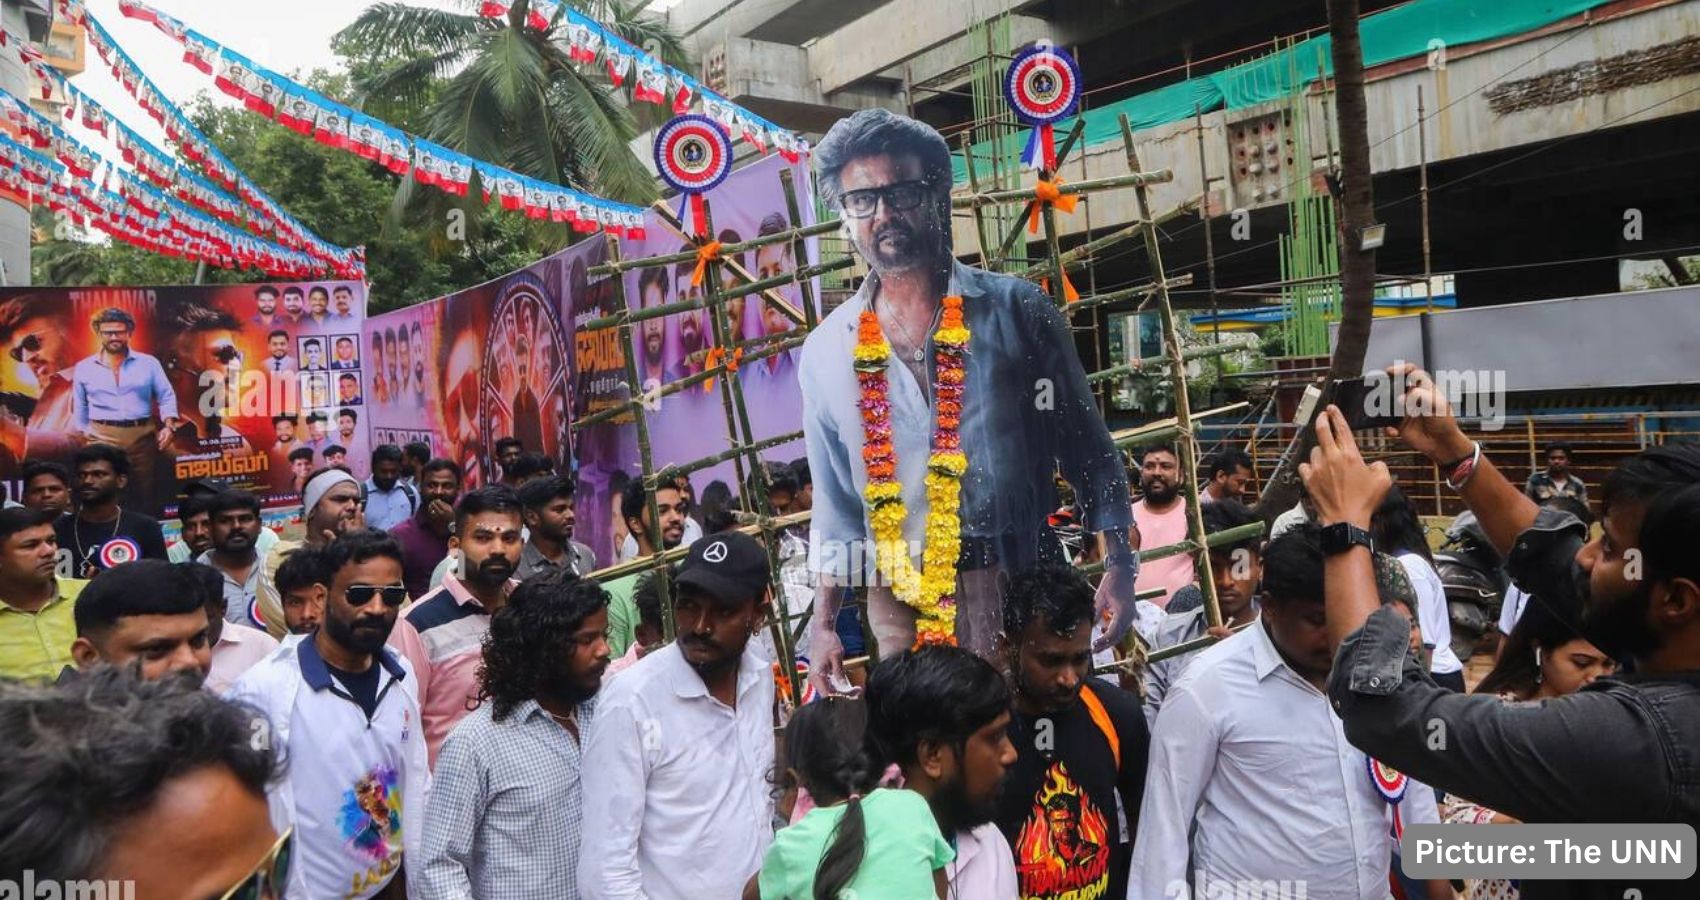 Vibrant Celebrations Welcome Latest Rajinikanth Film Release in South India